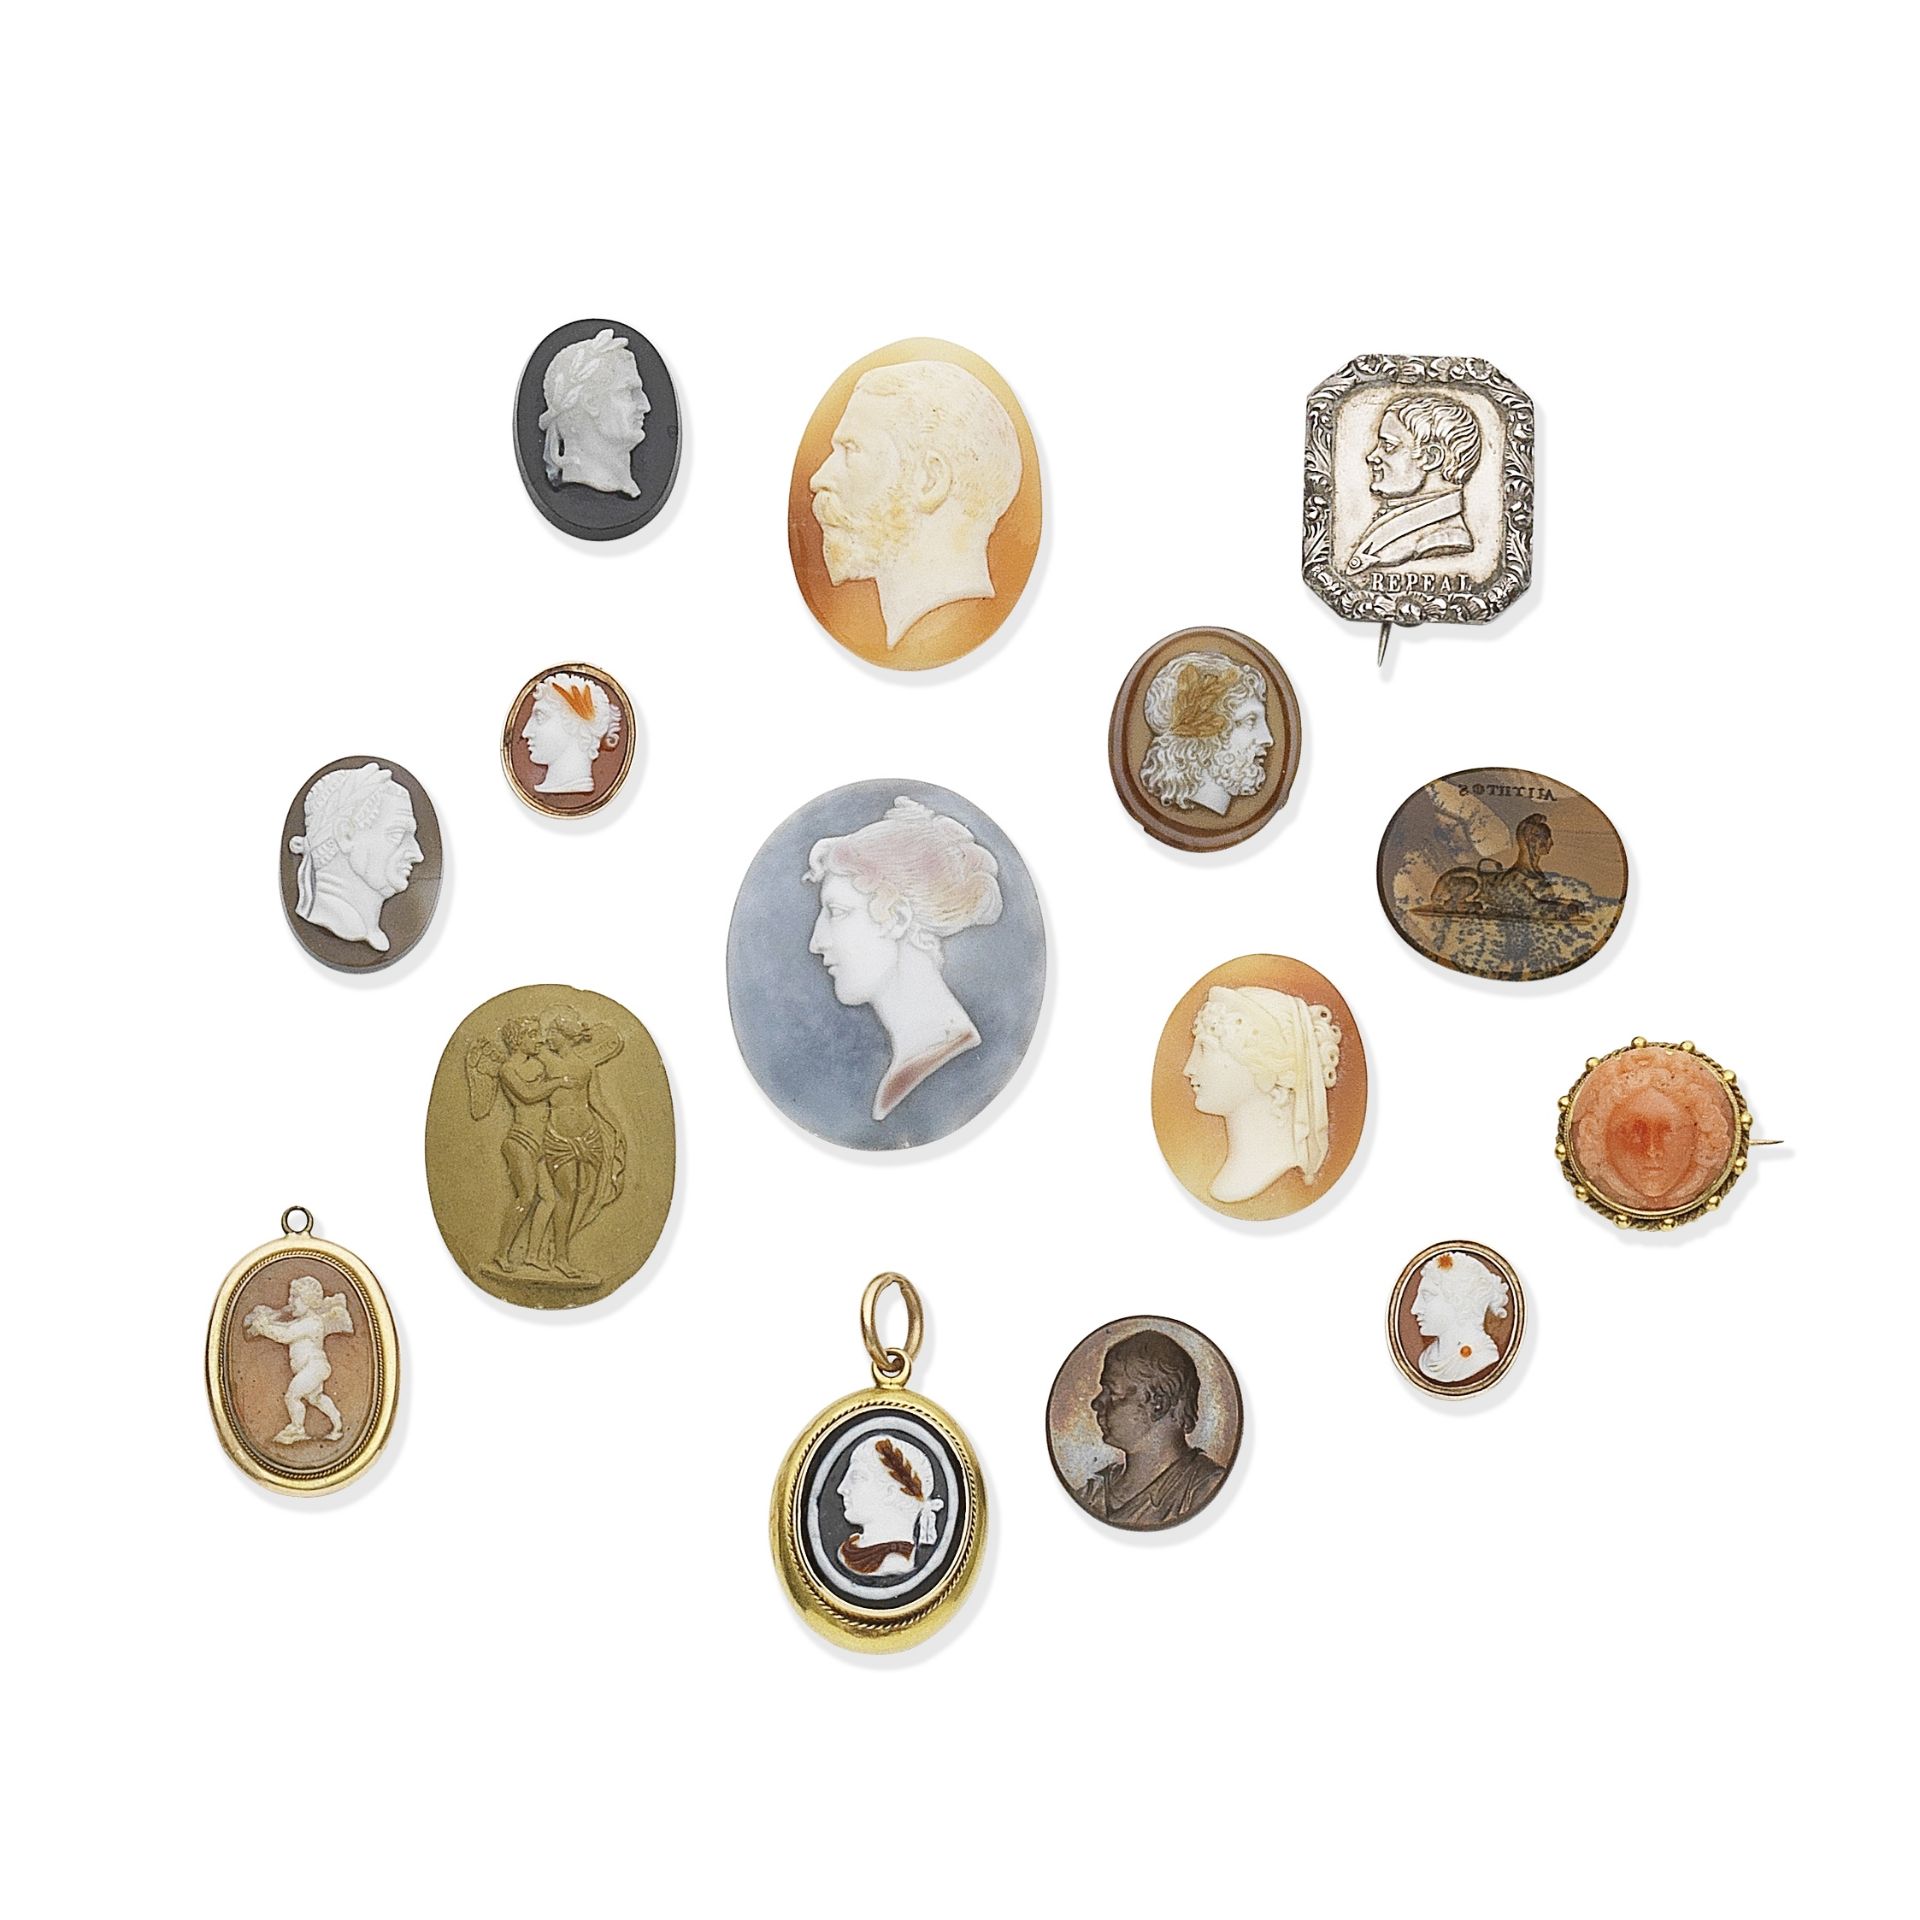 COLLECTION OF CORAL, SHELL, HARDSTONE AND METAL CAMEOS AND INTAGLIOS, 19TH CENTURY (15)